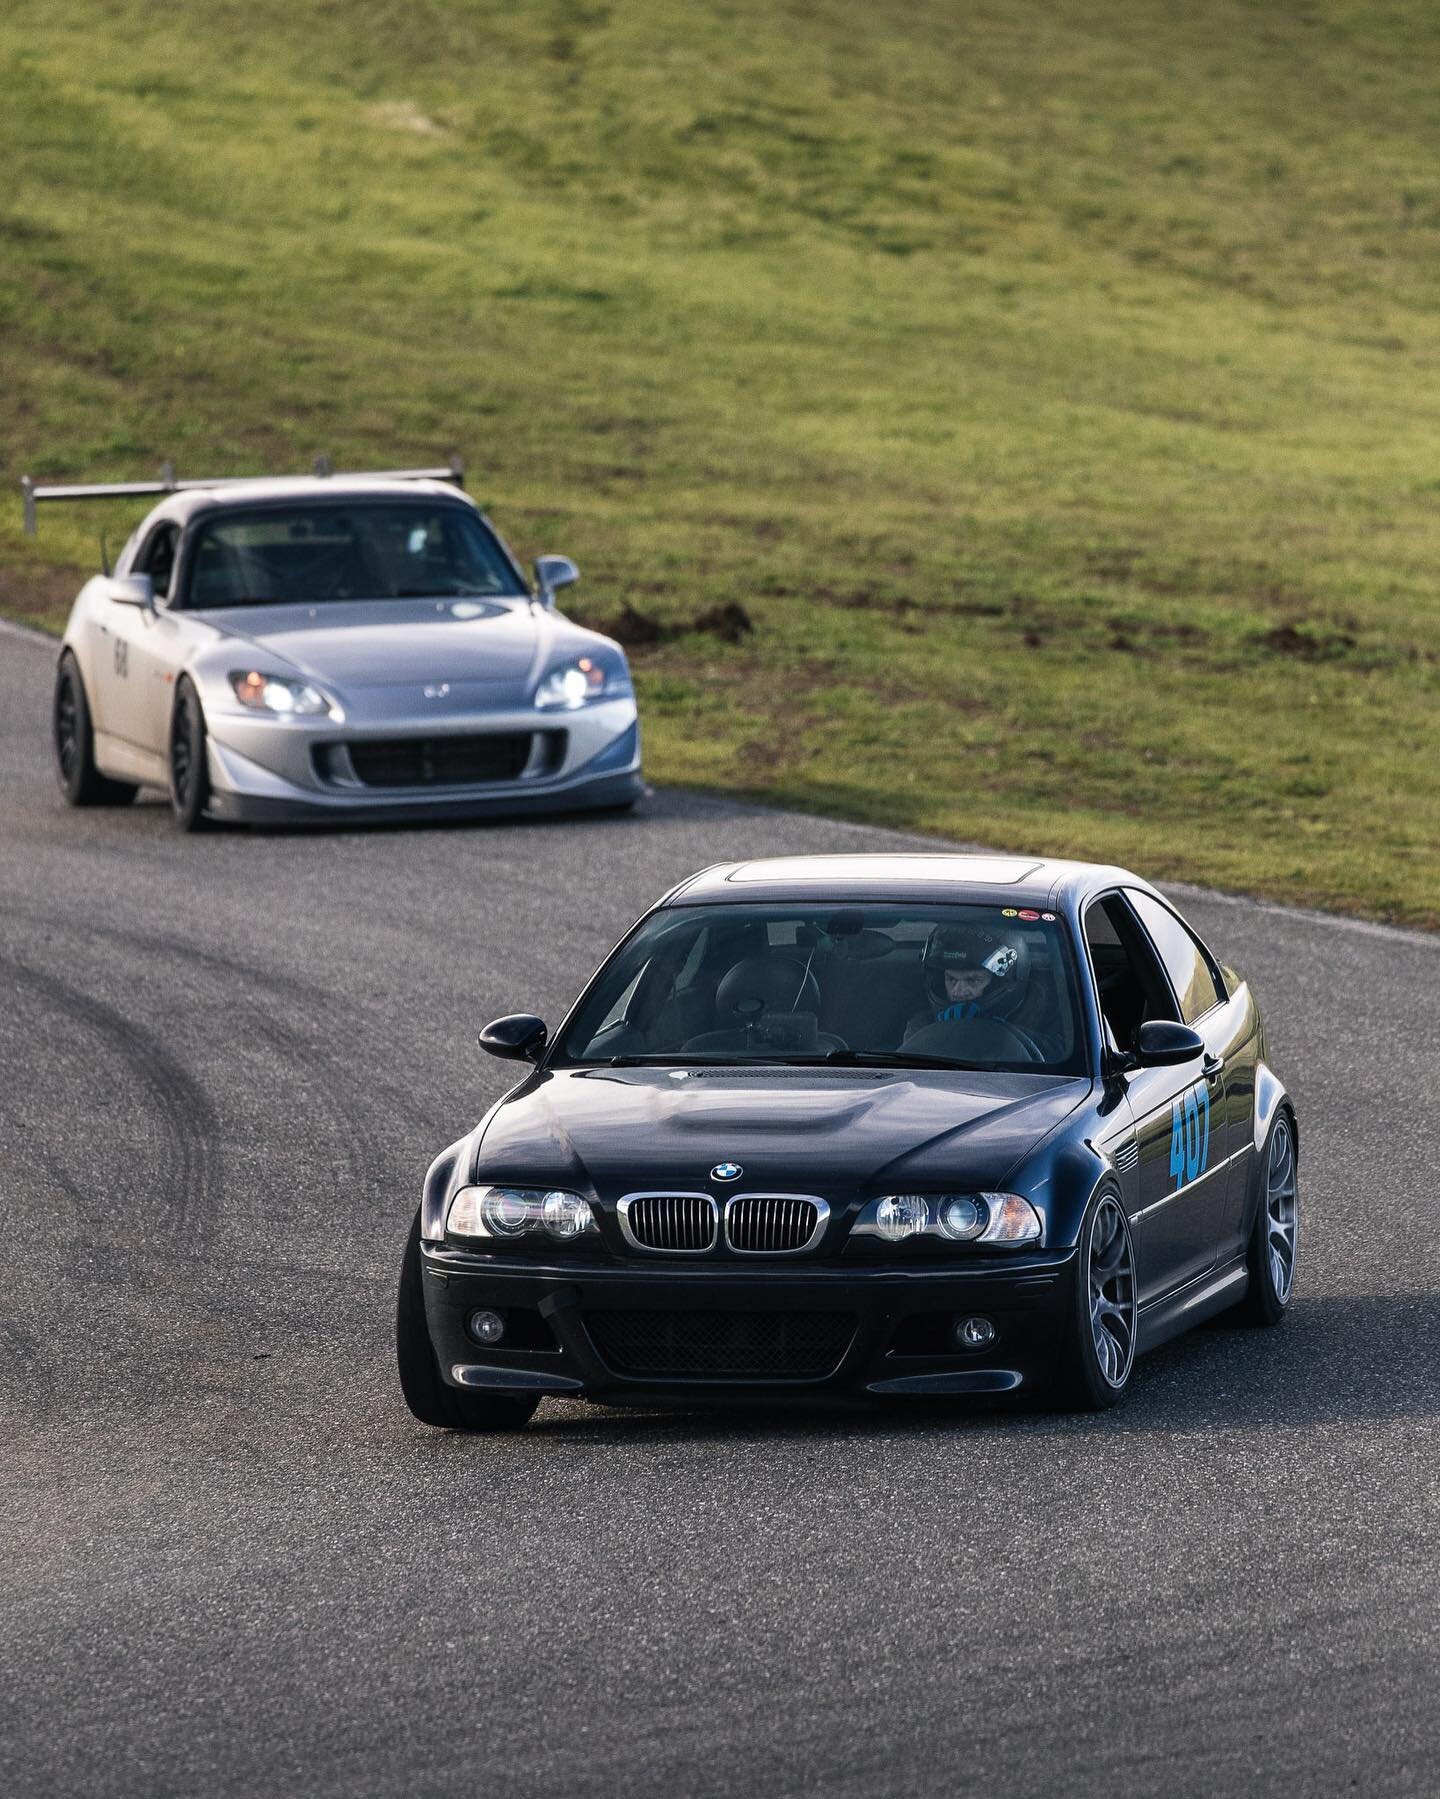 Weather should be calm after the storm, who is ready for this upcoming track weekend!
.
.
.
#speedsf #speedsftrackevents #bmw #bmwe46 #e46m3 #m3 #thunderhill #thunderhillraceway